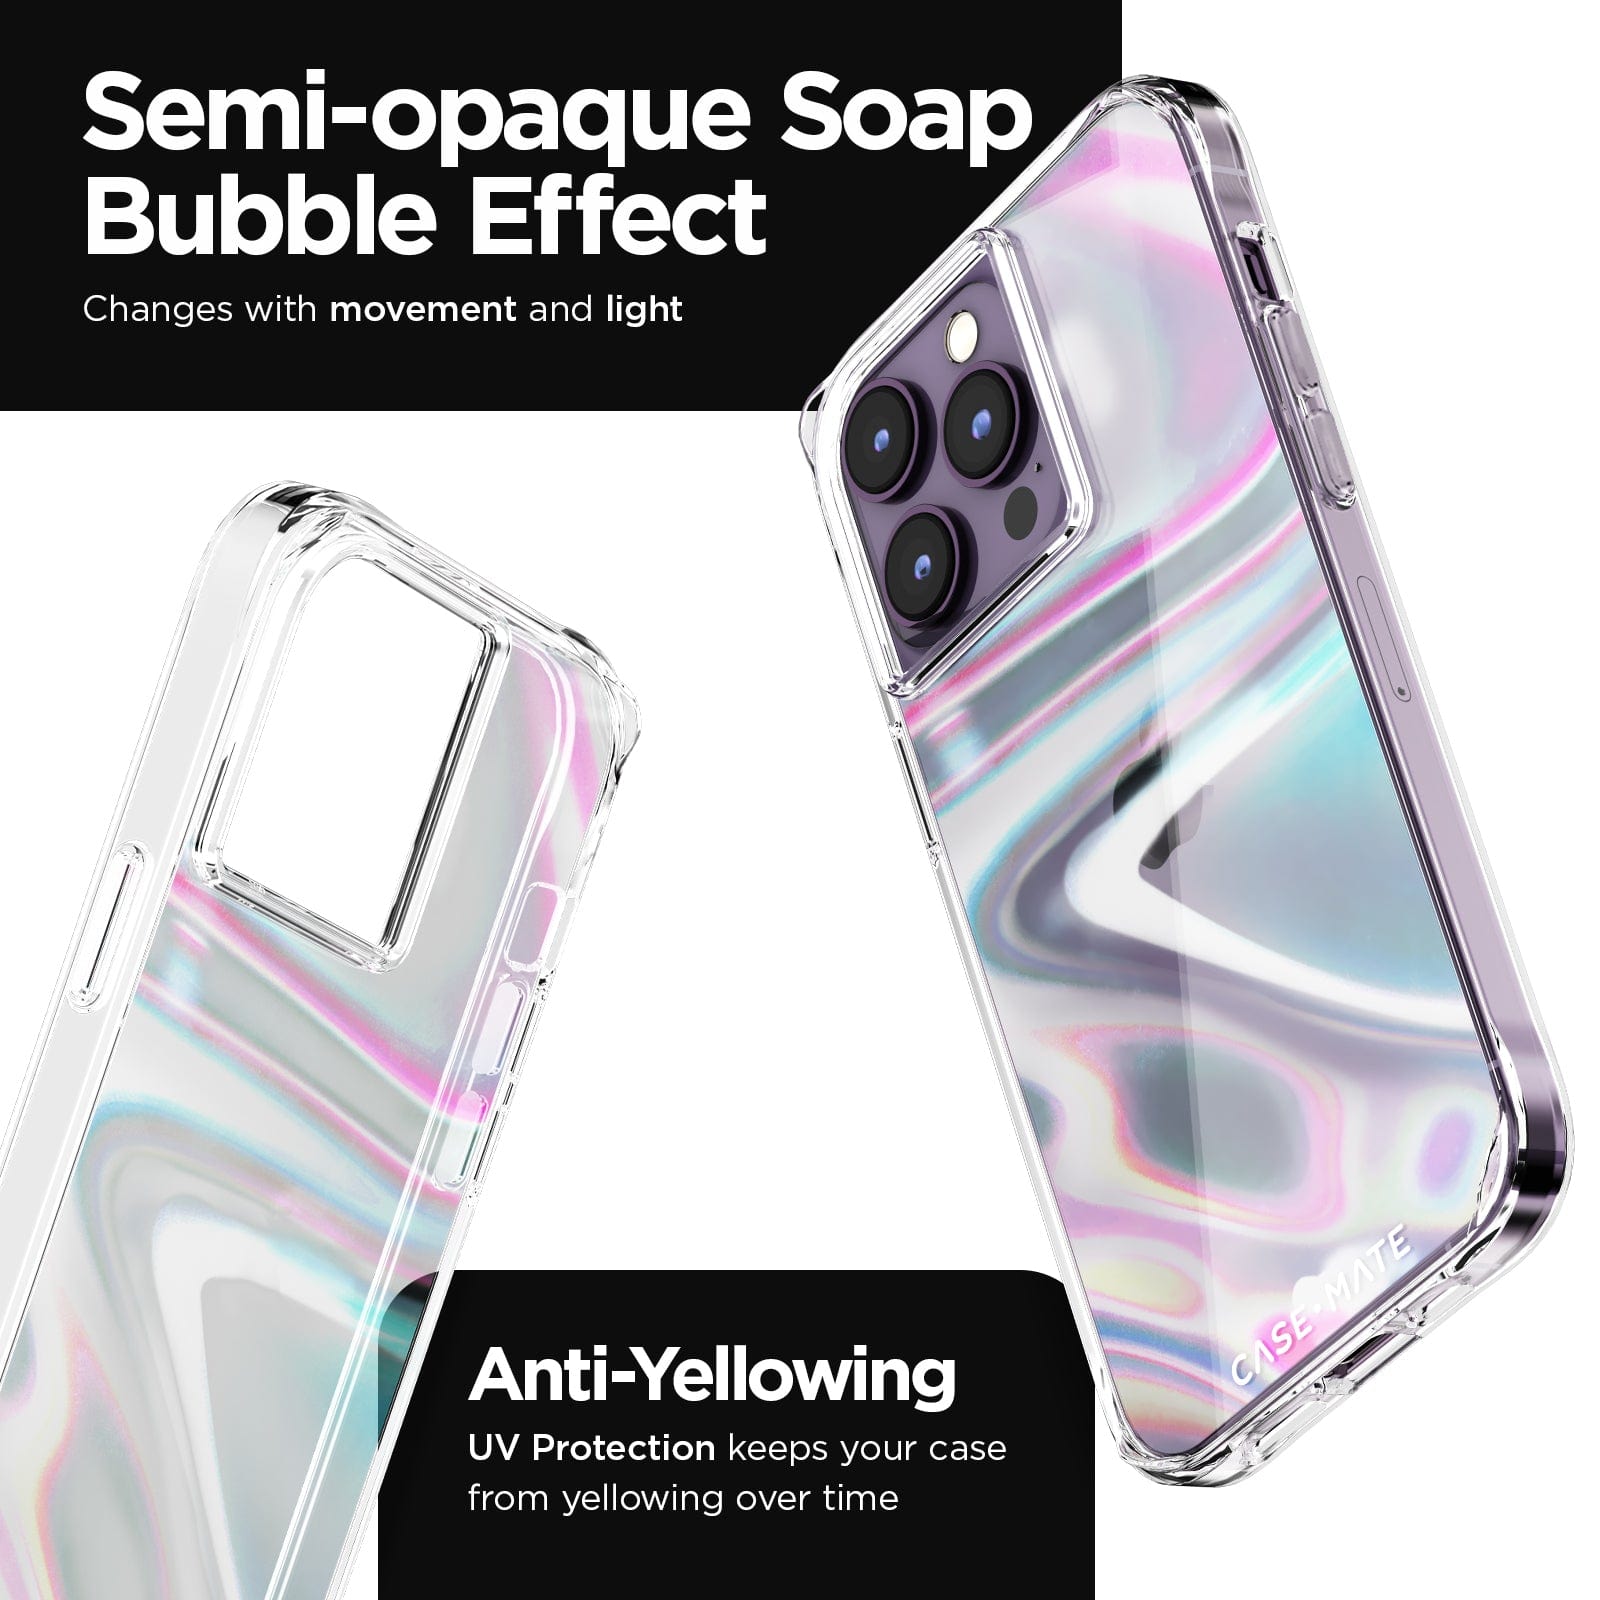 SEMI-OPAQUE SOAP BUBBLE EFFECT CHANGES WITH MOVEMENT AND LIGHT. ANTI-YELLOWING UV PROTECTION KEEPS YOUR CASE FROM YELLOWING OVER TIME.